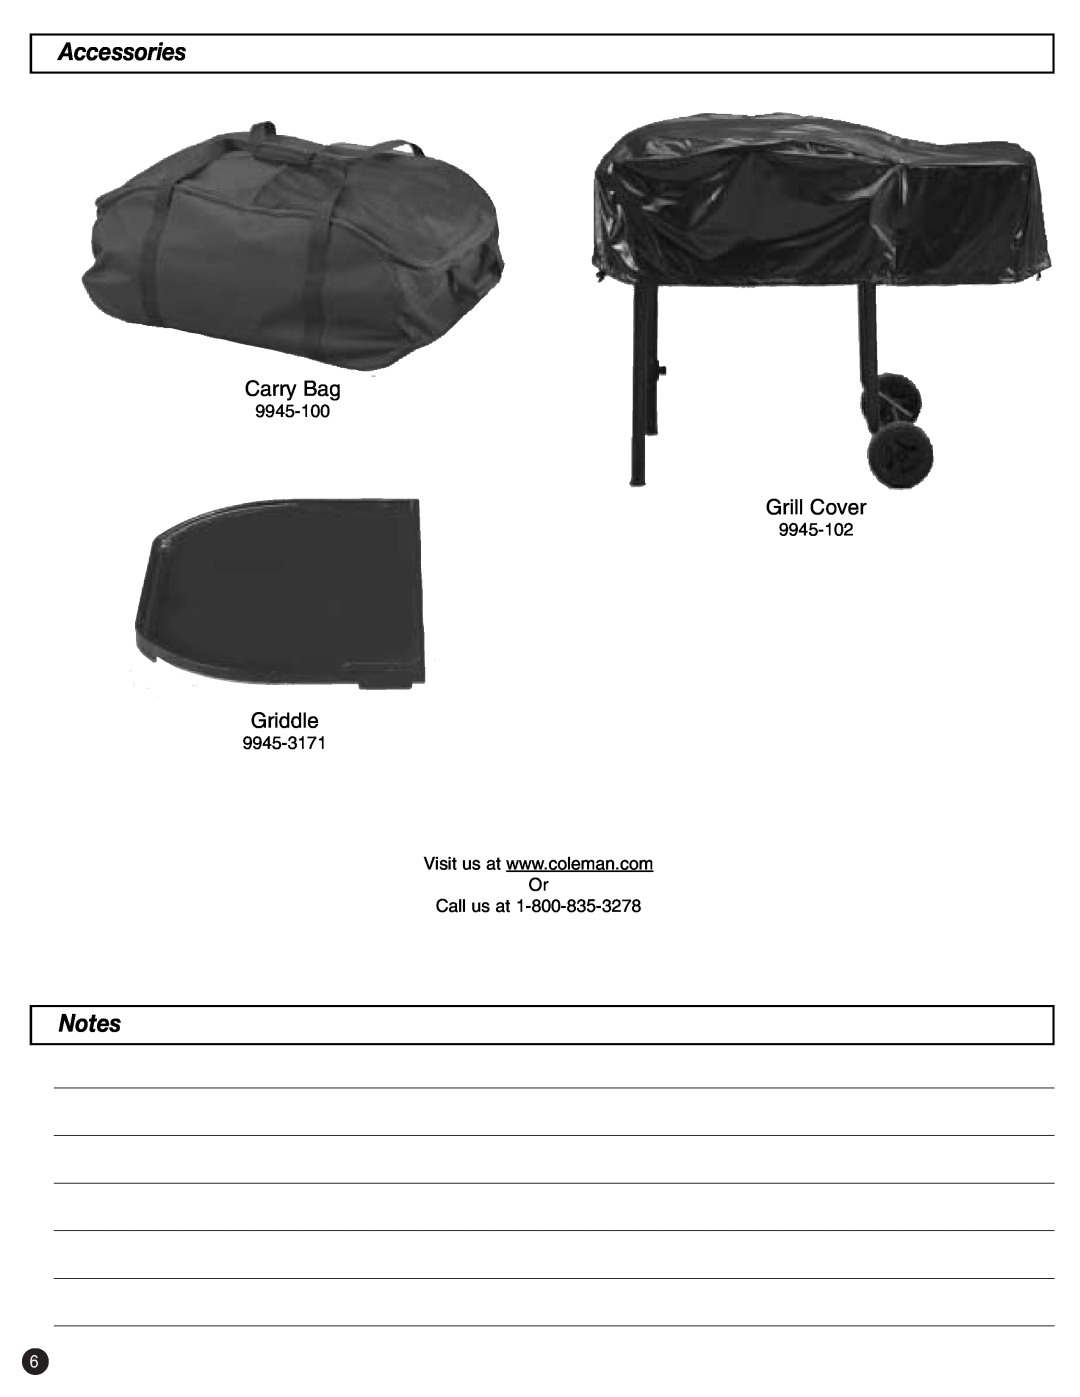 Coleman p9945-700 instruction manual Accessories, Carry Bag, Grill Cover, Griddle 